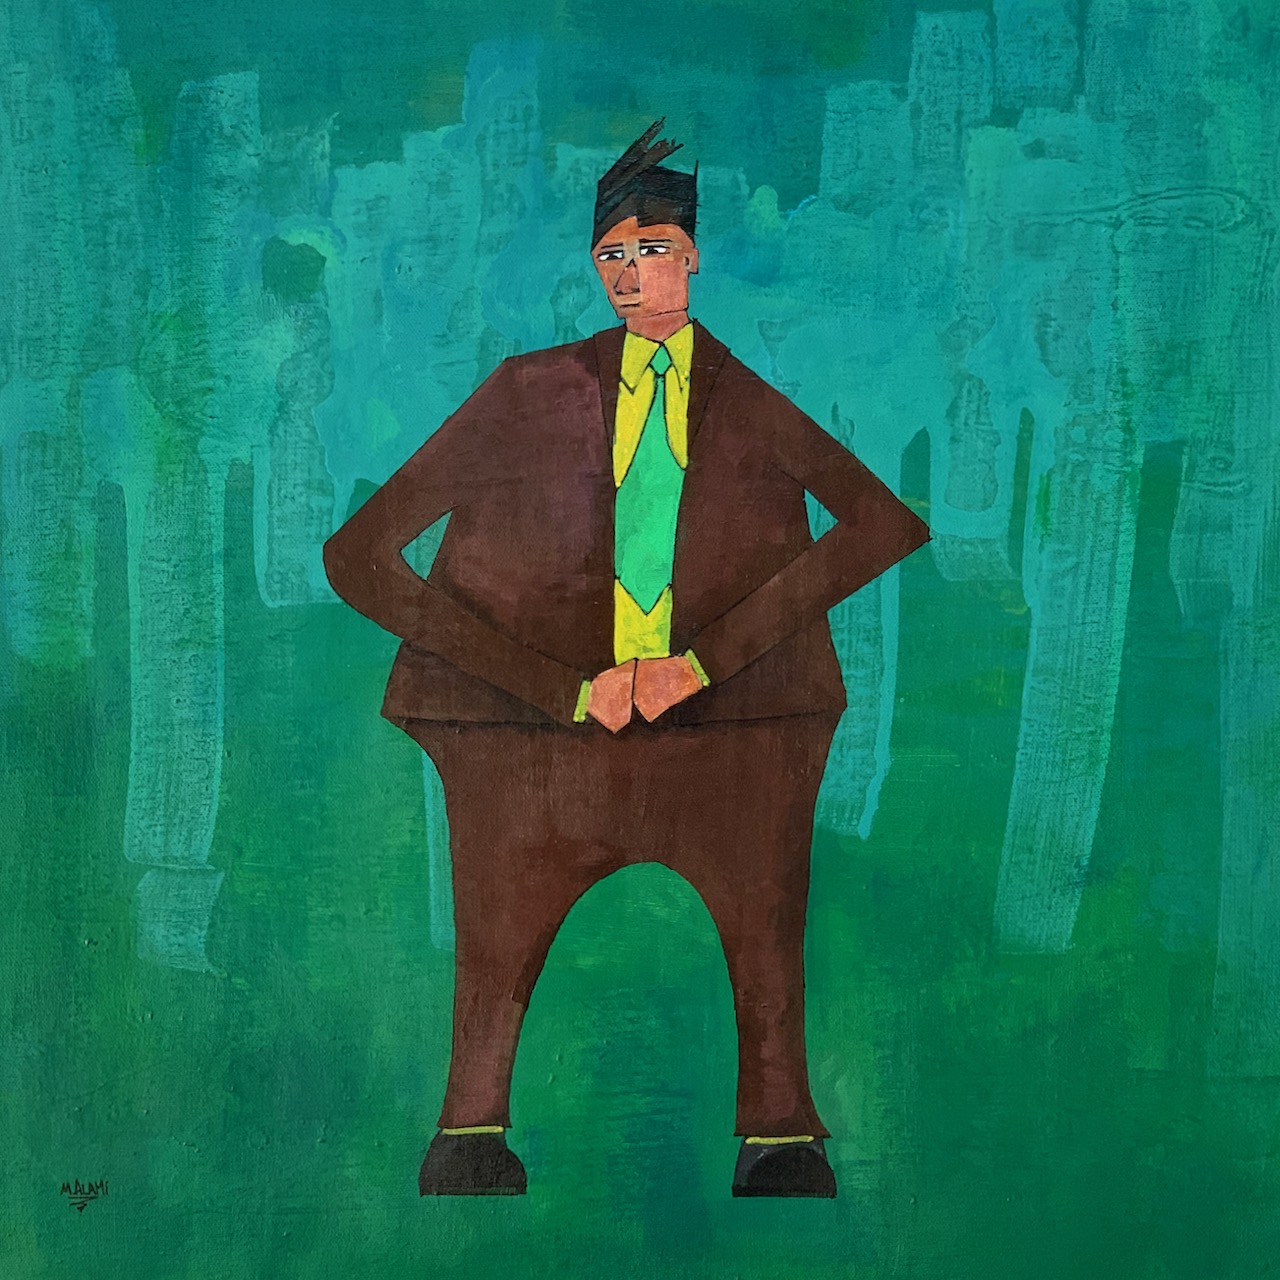 Painting of Man in a green suit